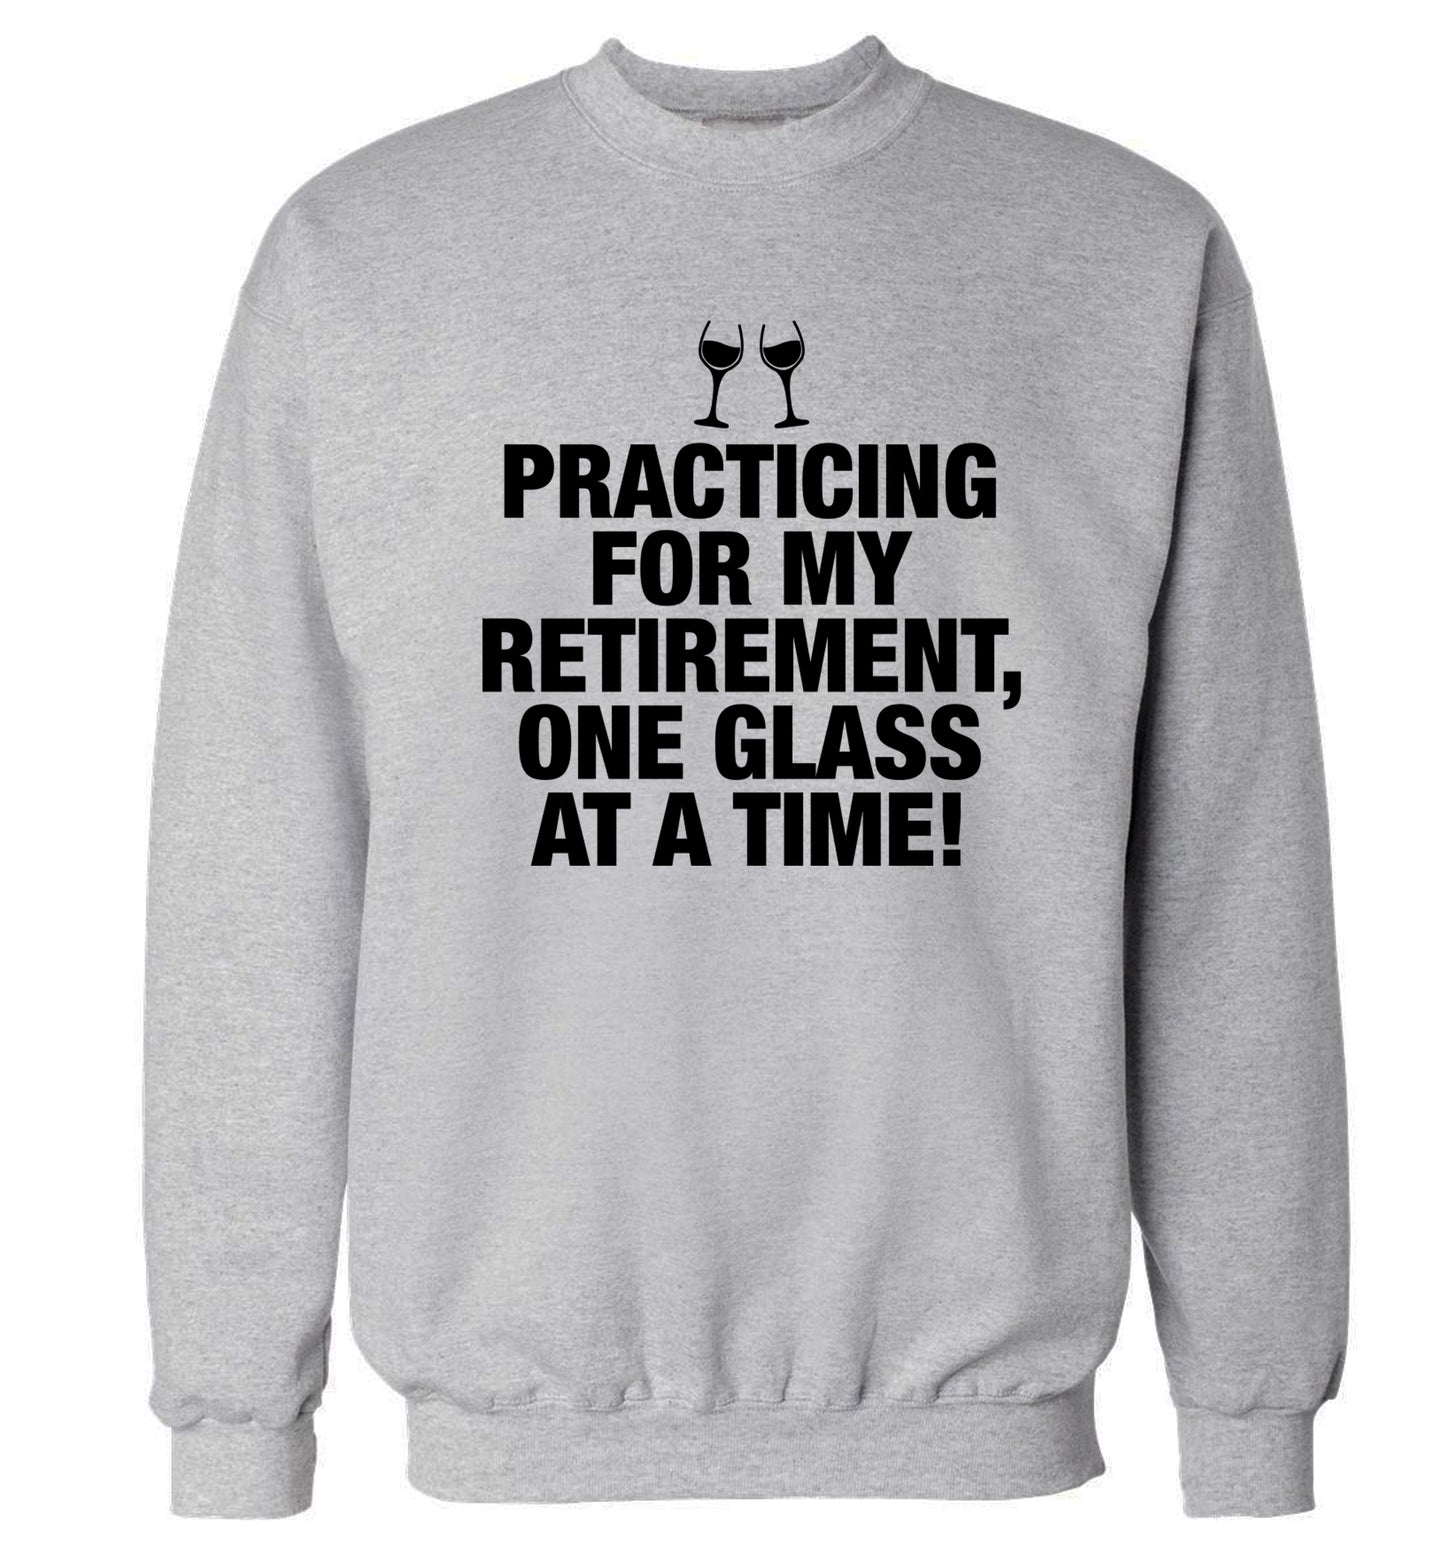 Practicing my retirement one glass at a time Adult's unisex grey Sweater 2XL